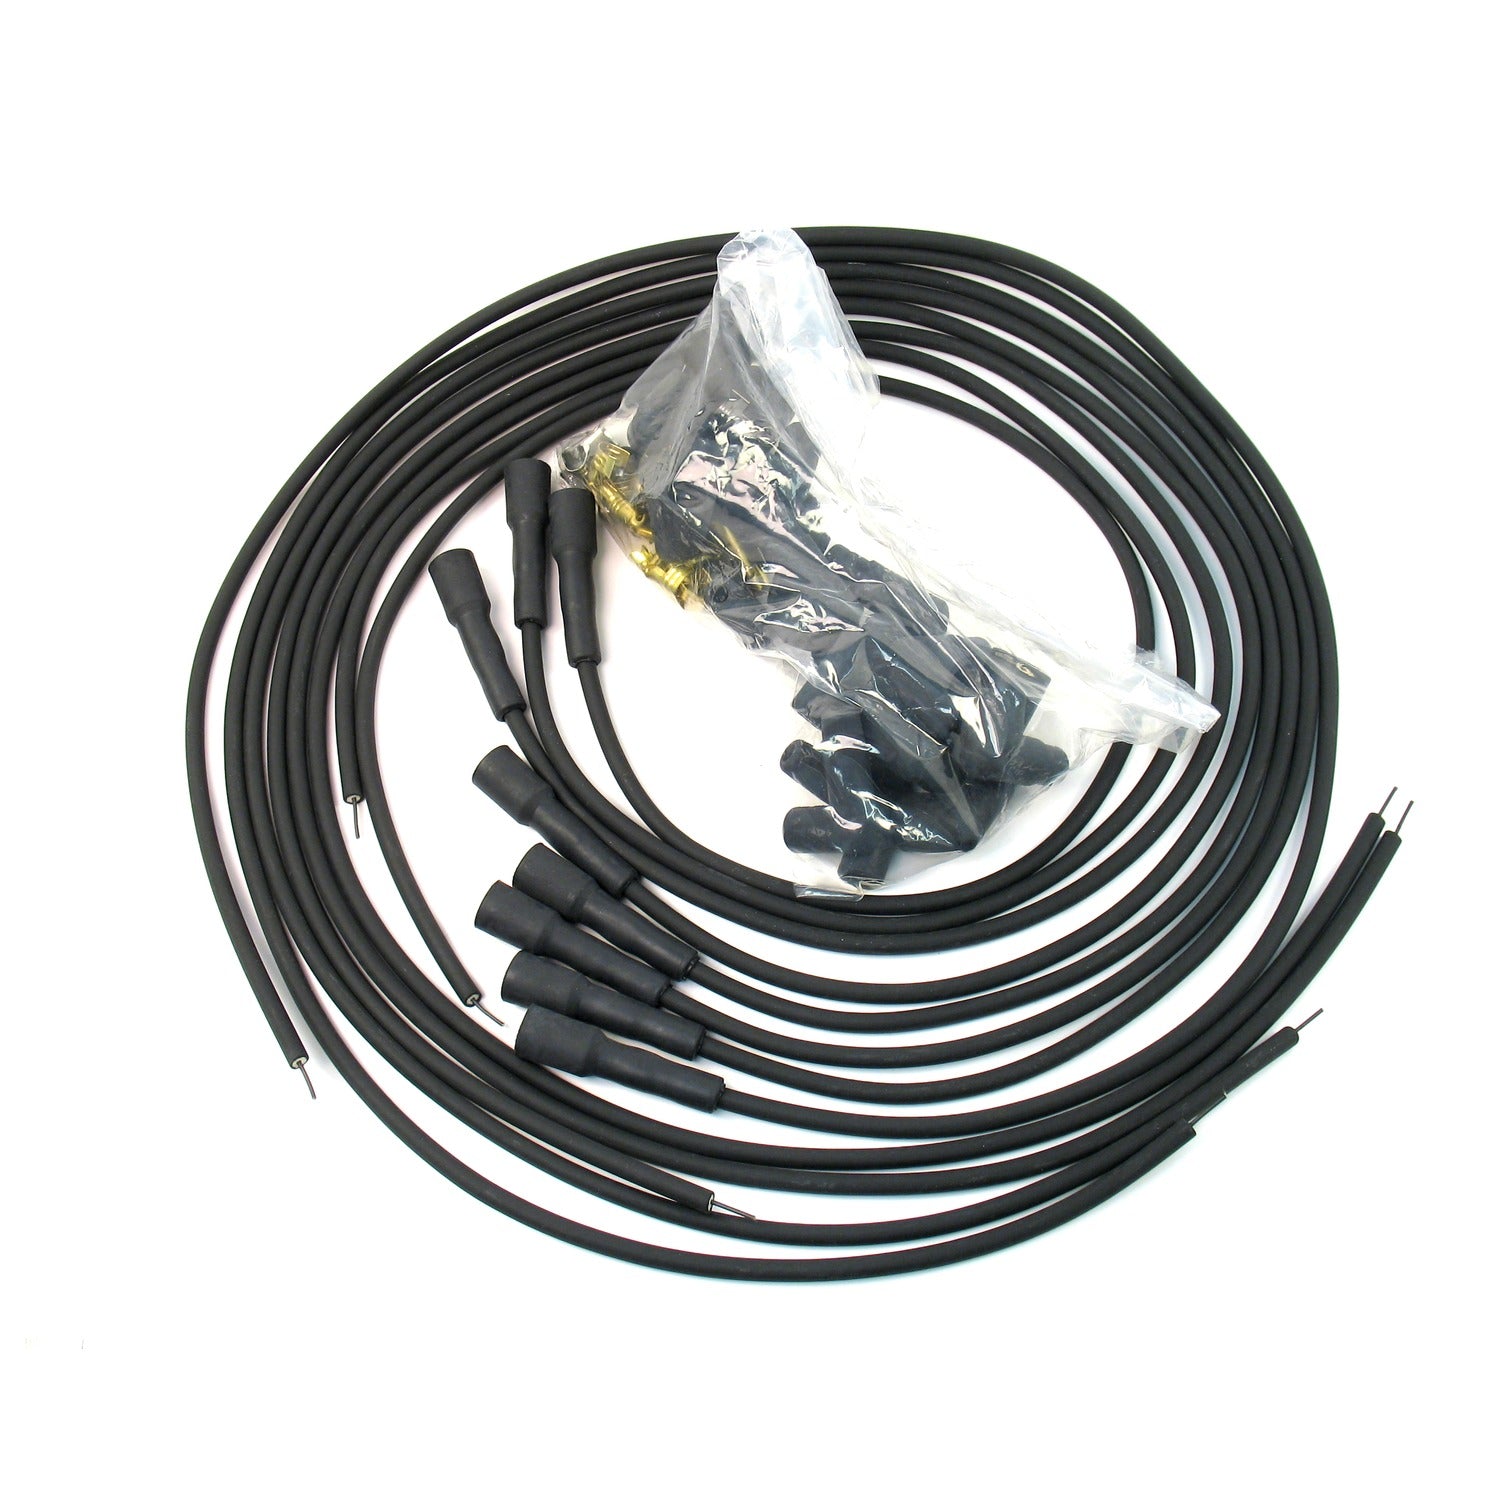 Pertronix 708180 PerTronix 708190 Flame-Thrower Spark Plug Wires 8